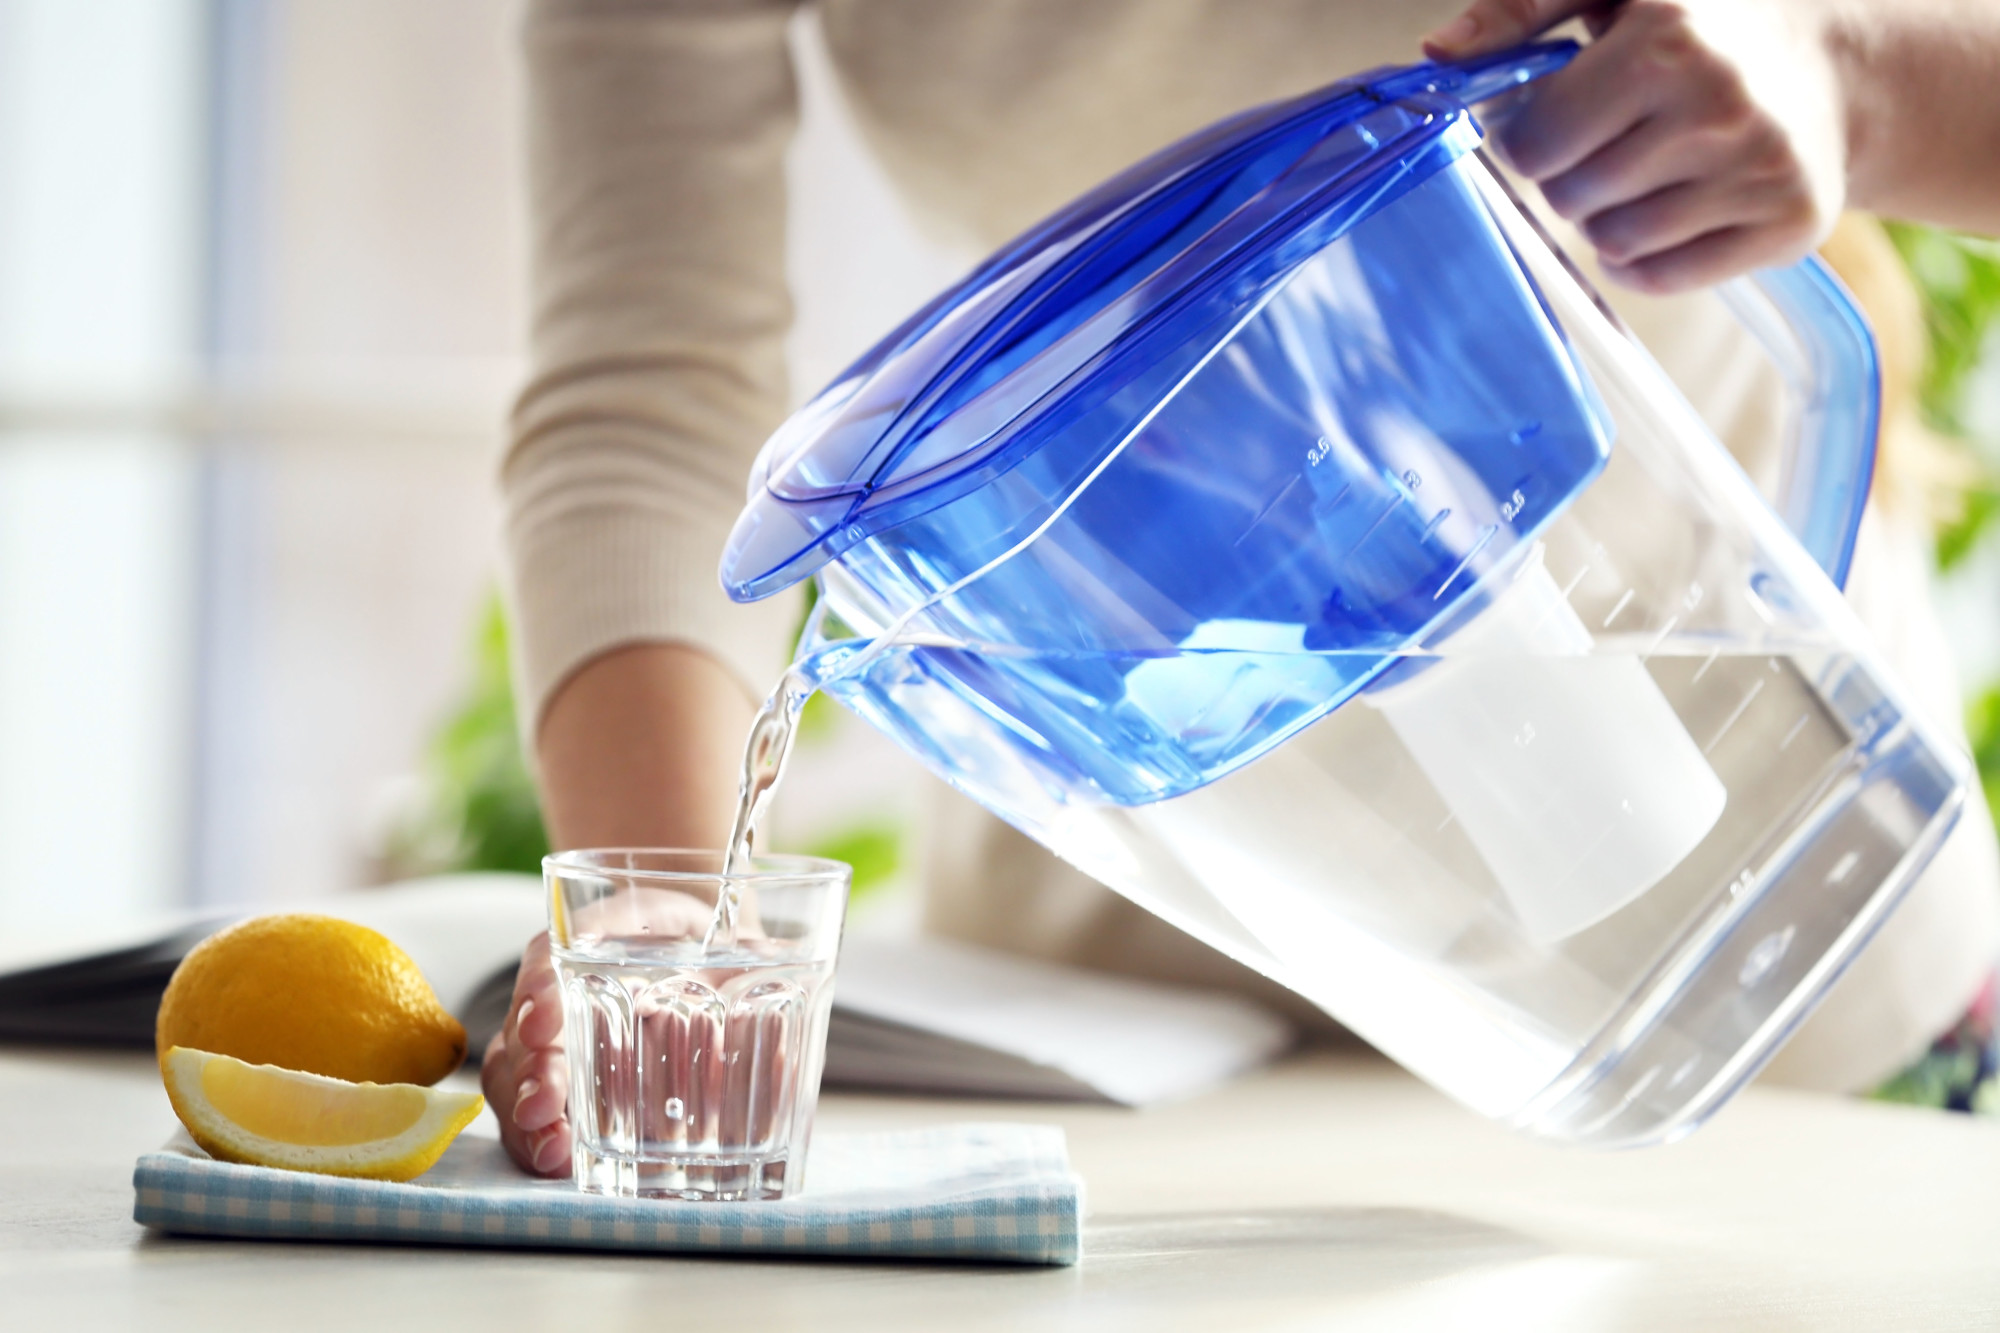 Would You Drink It? Here’s What Your Drinking Without a Water Filtration System